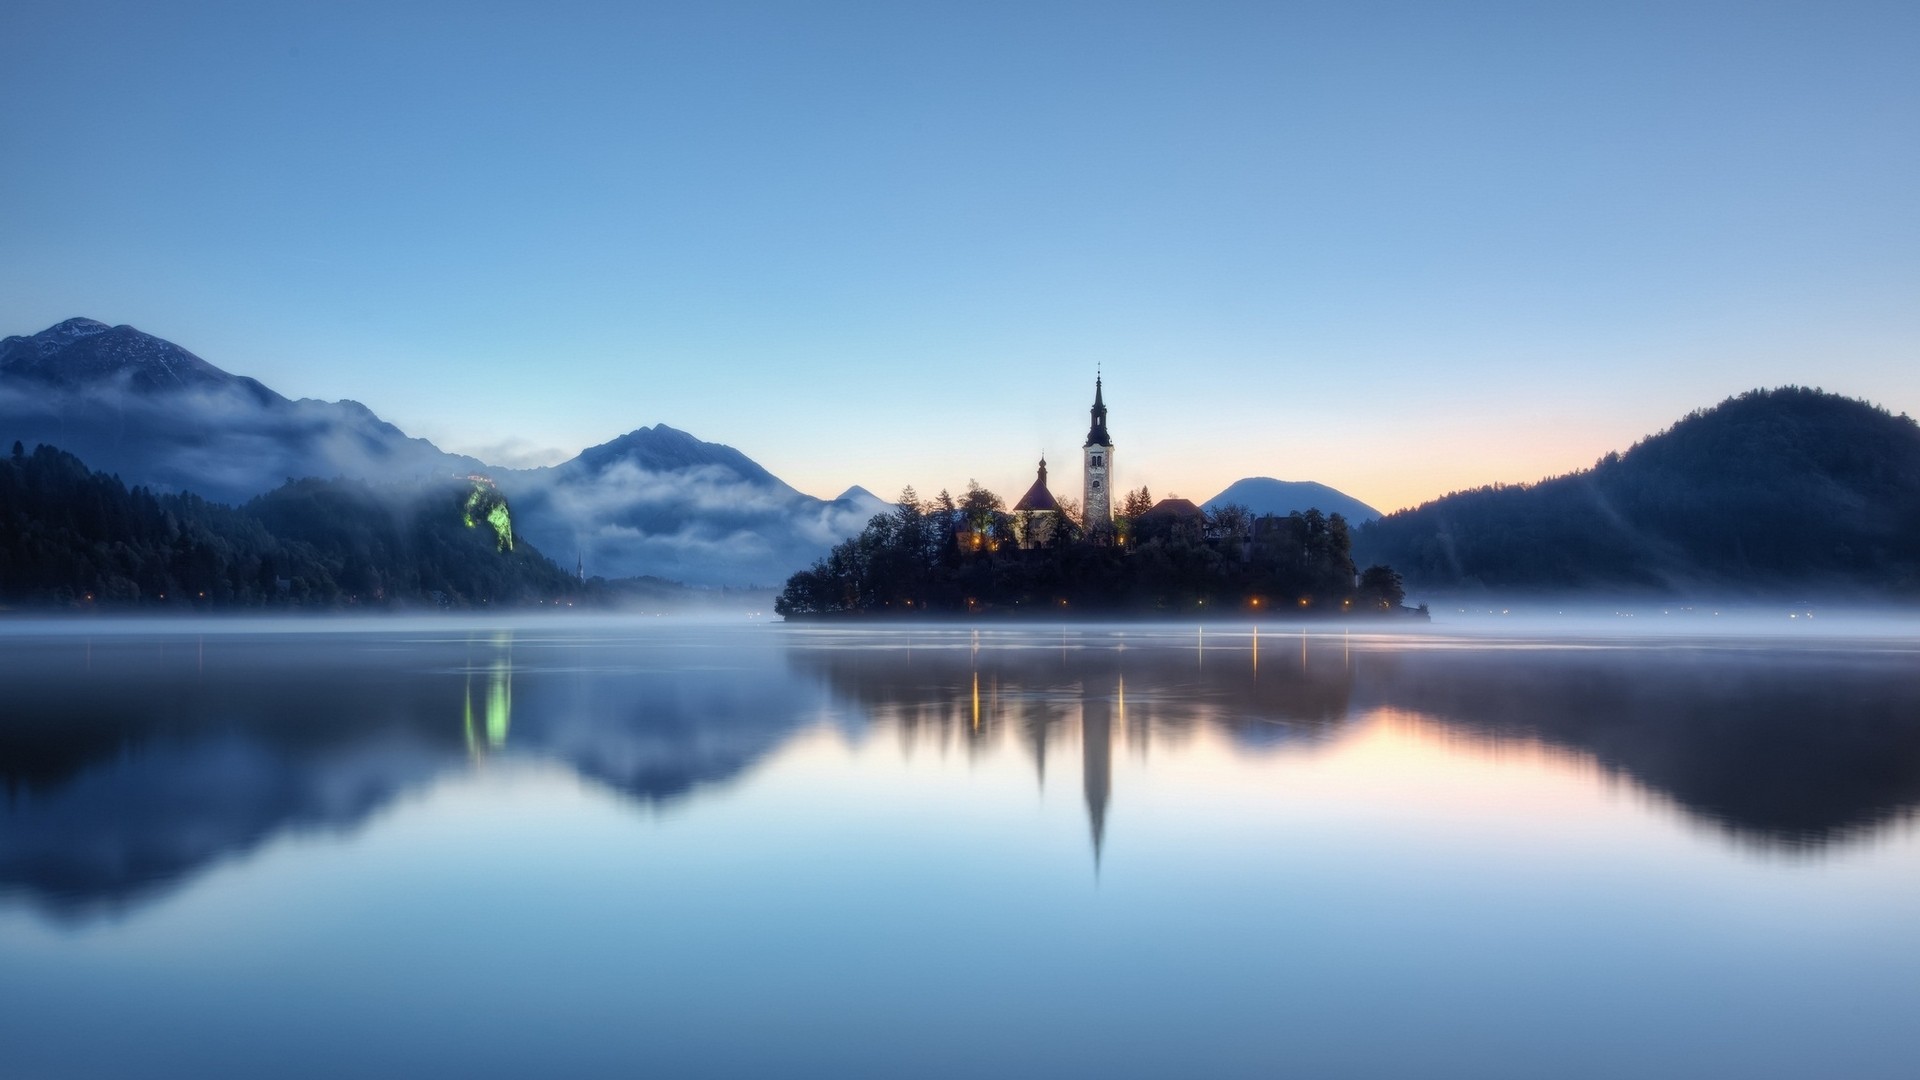 Lake Reflection Island Water Trees Landscape Nature Mountains Church Lake Bled Mist Calm Blue Clear  1920x1080